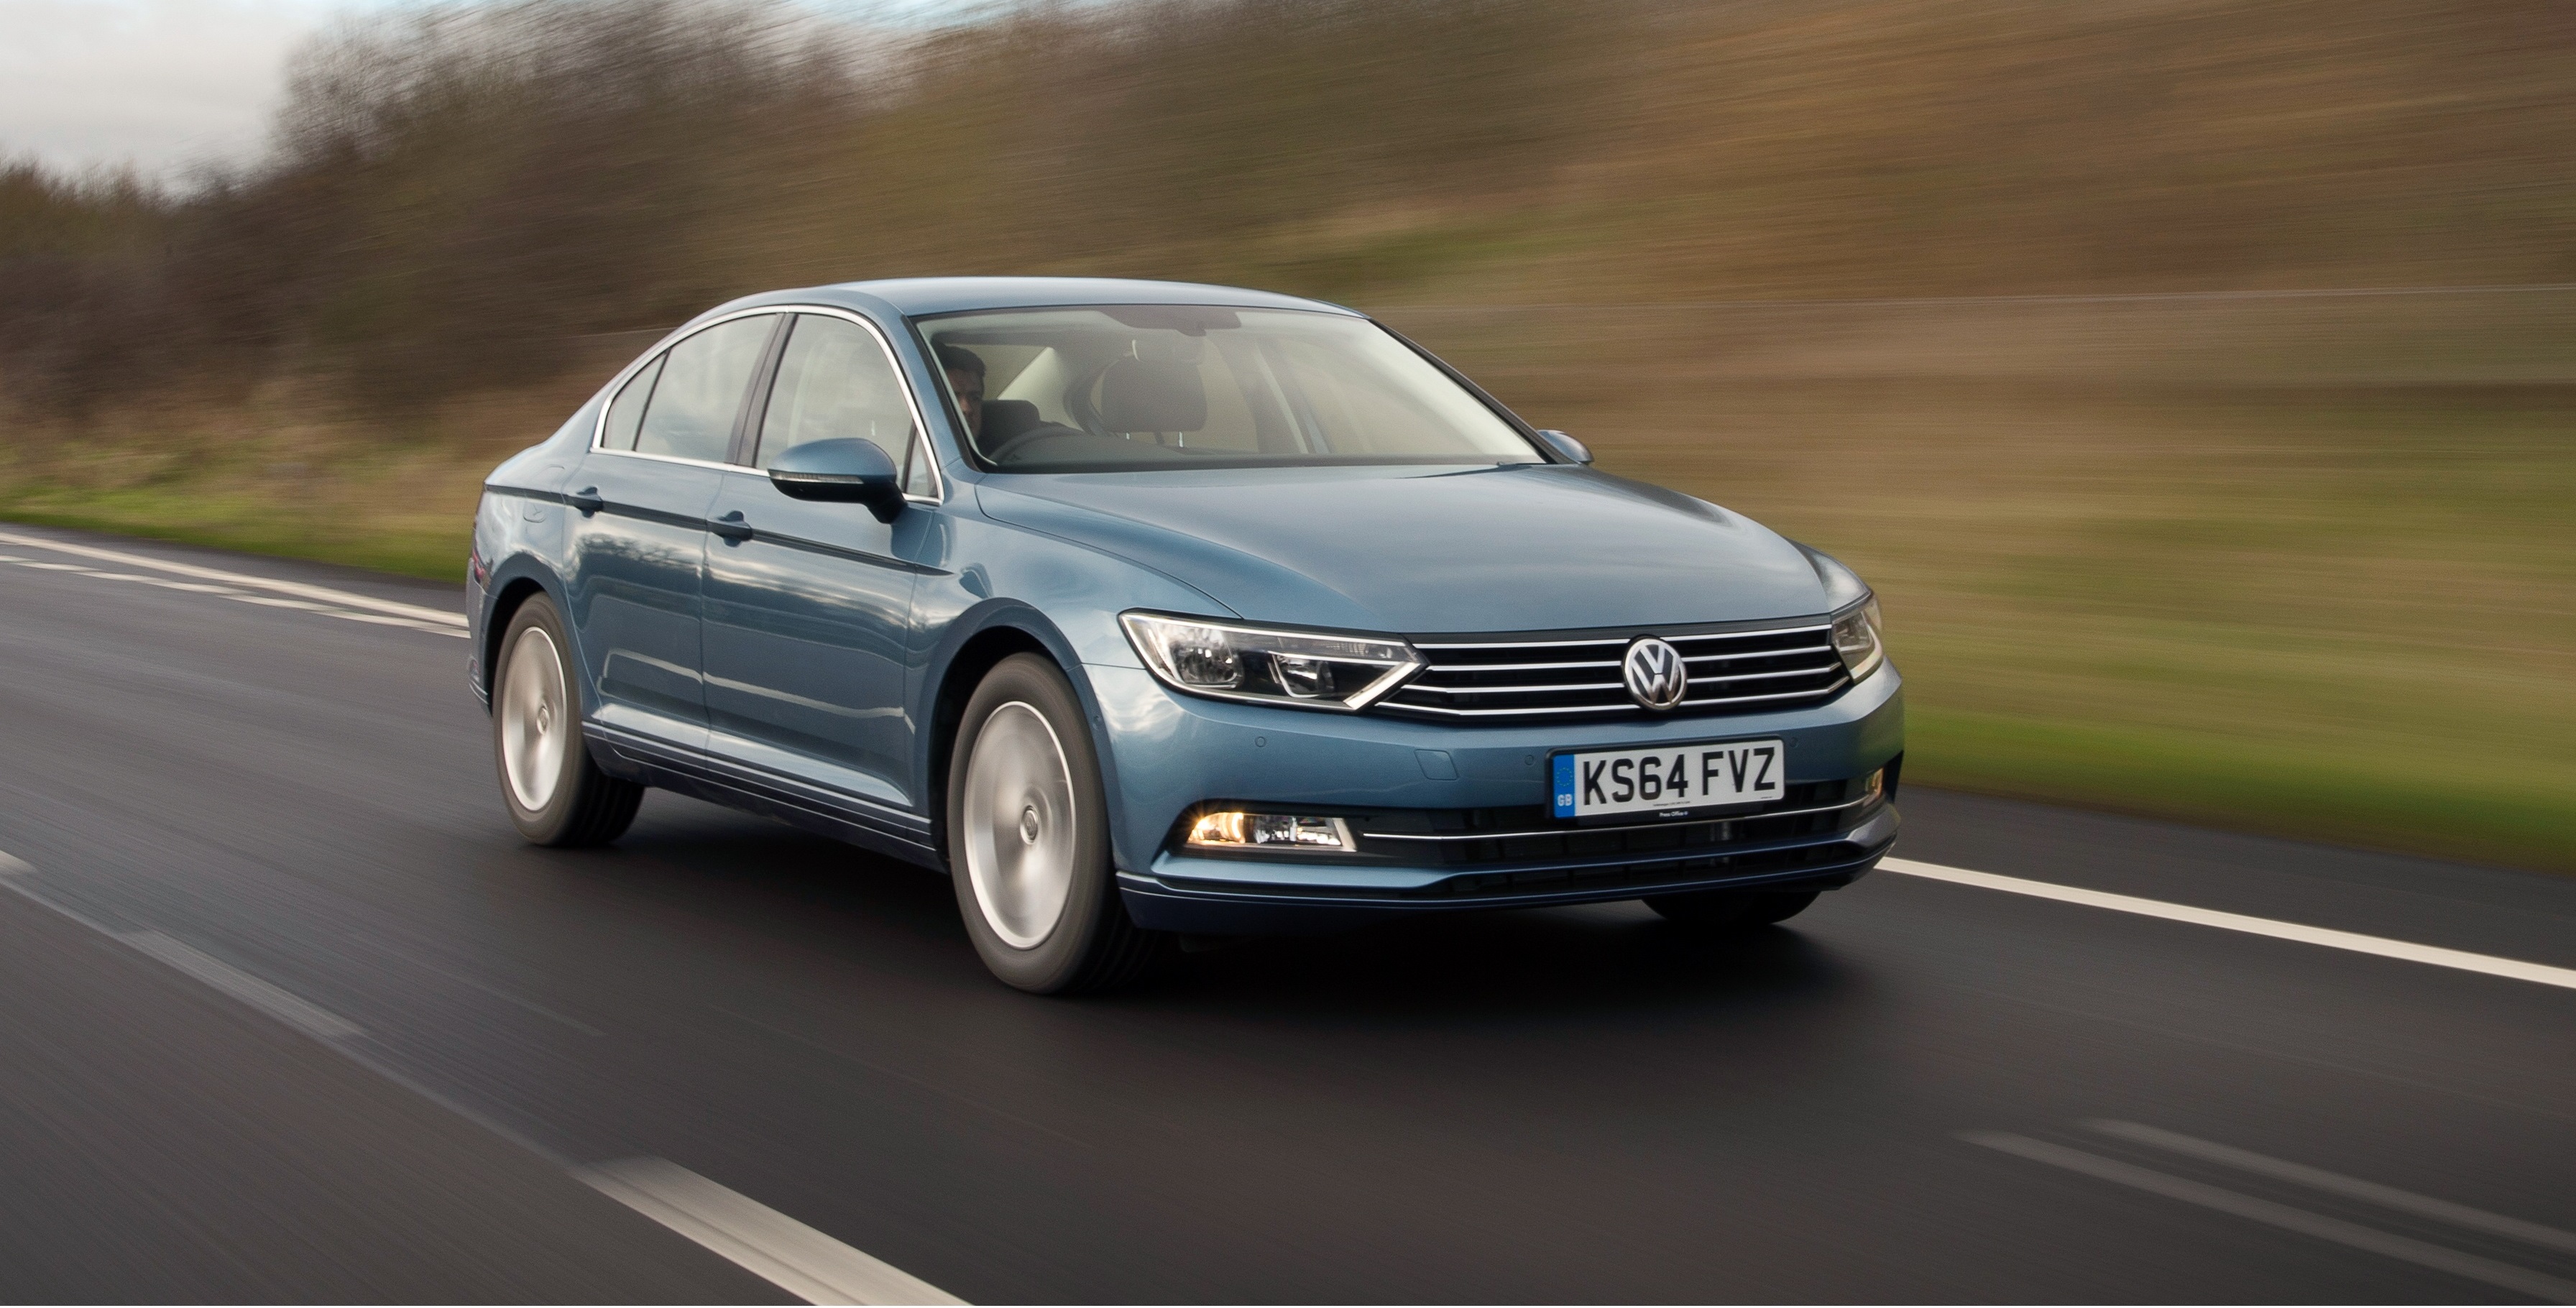 Vw Passat And Estate Sizes And Dimensions Guide Carwow